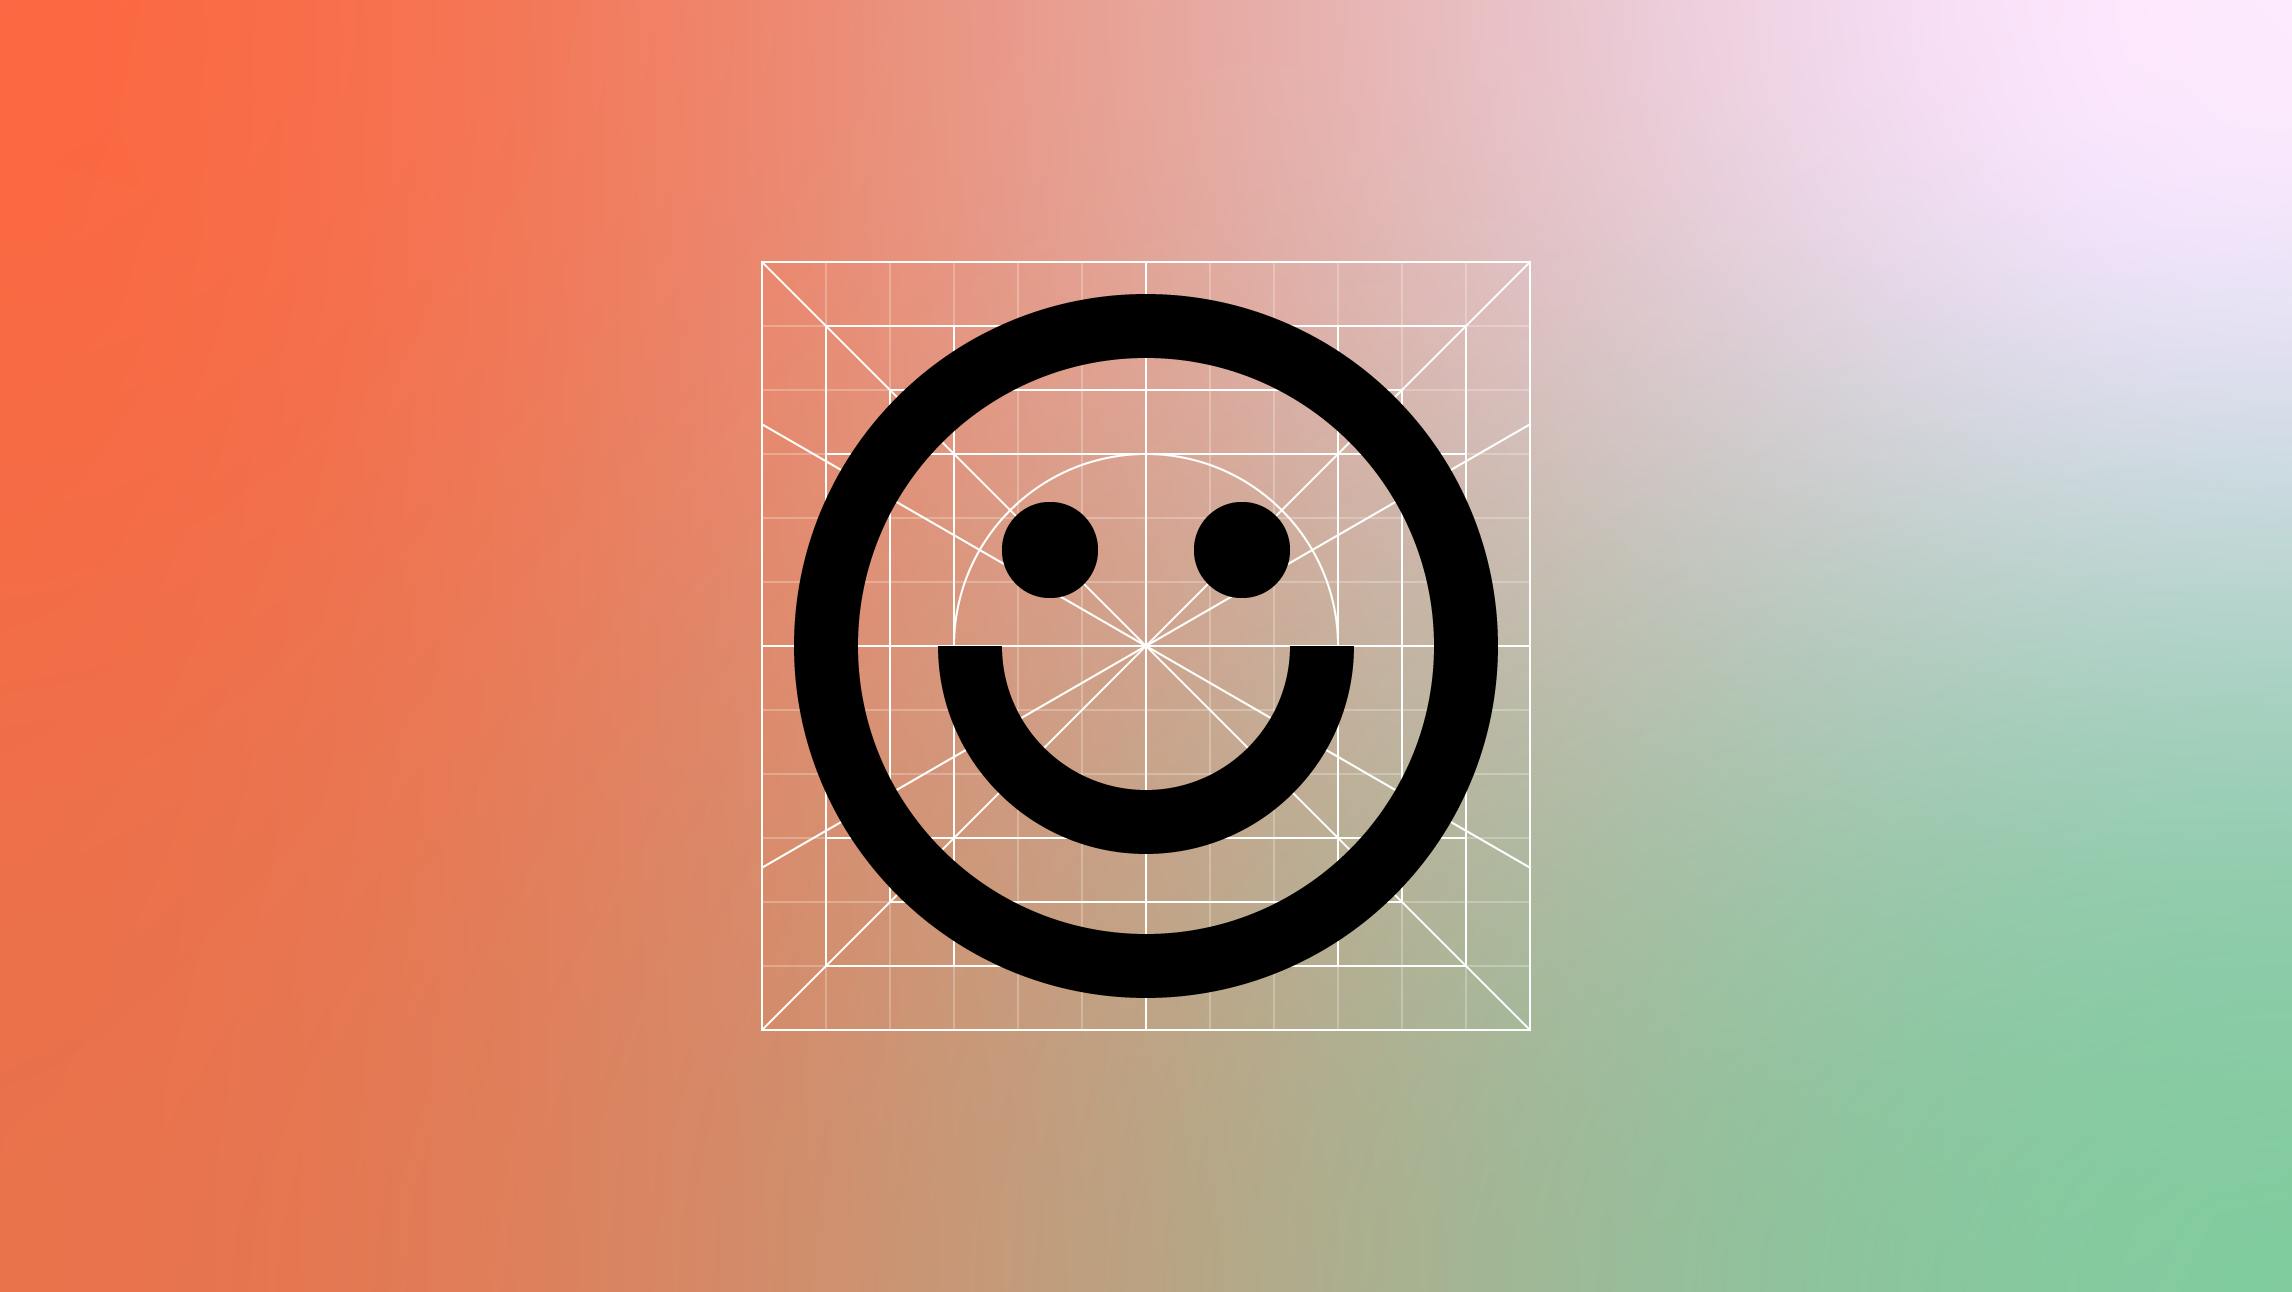 Centered on a red-orange to green and purple gradient background, a large, smiley face icon, following the icon creation guidelines is displayed.